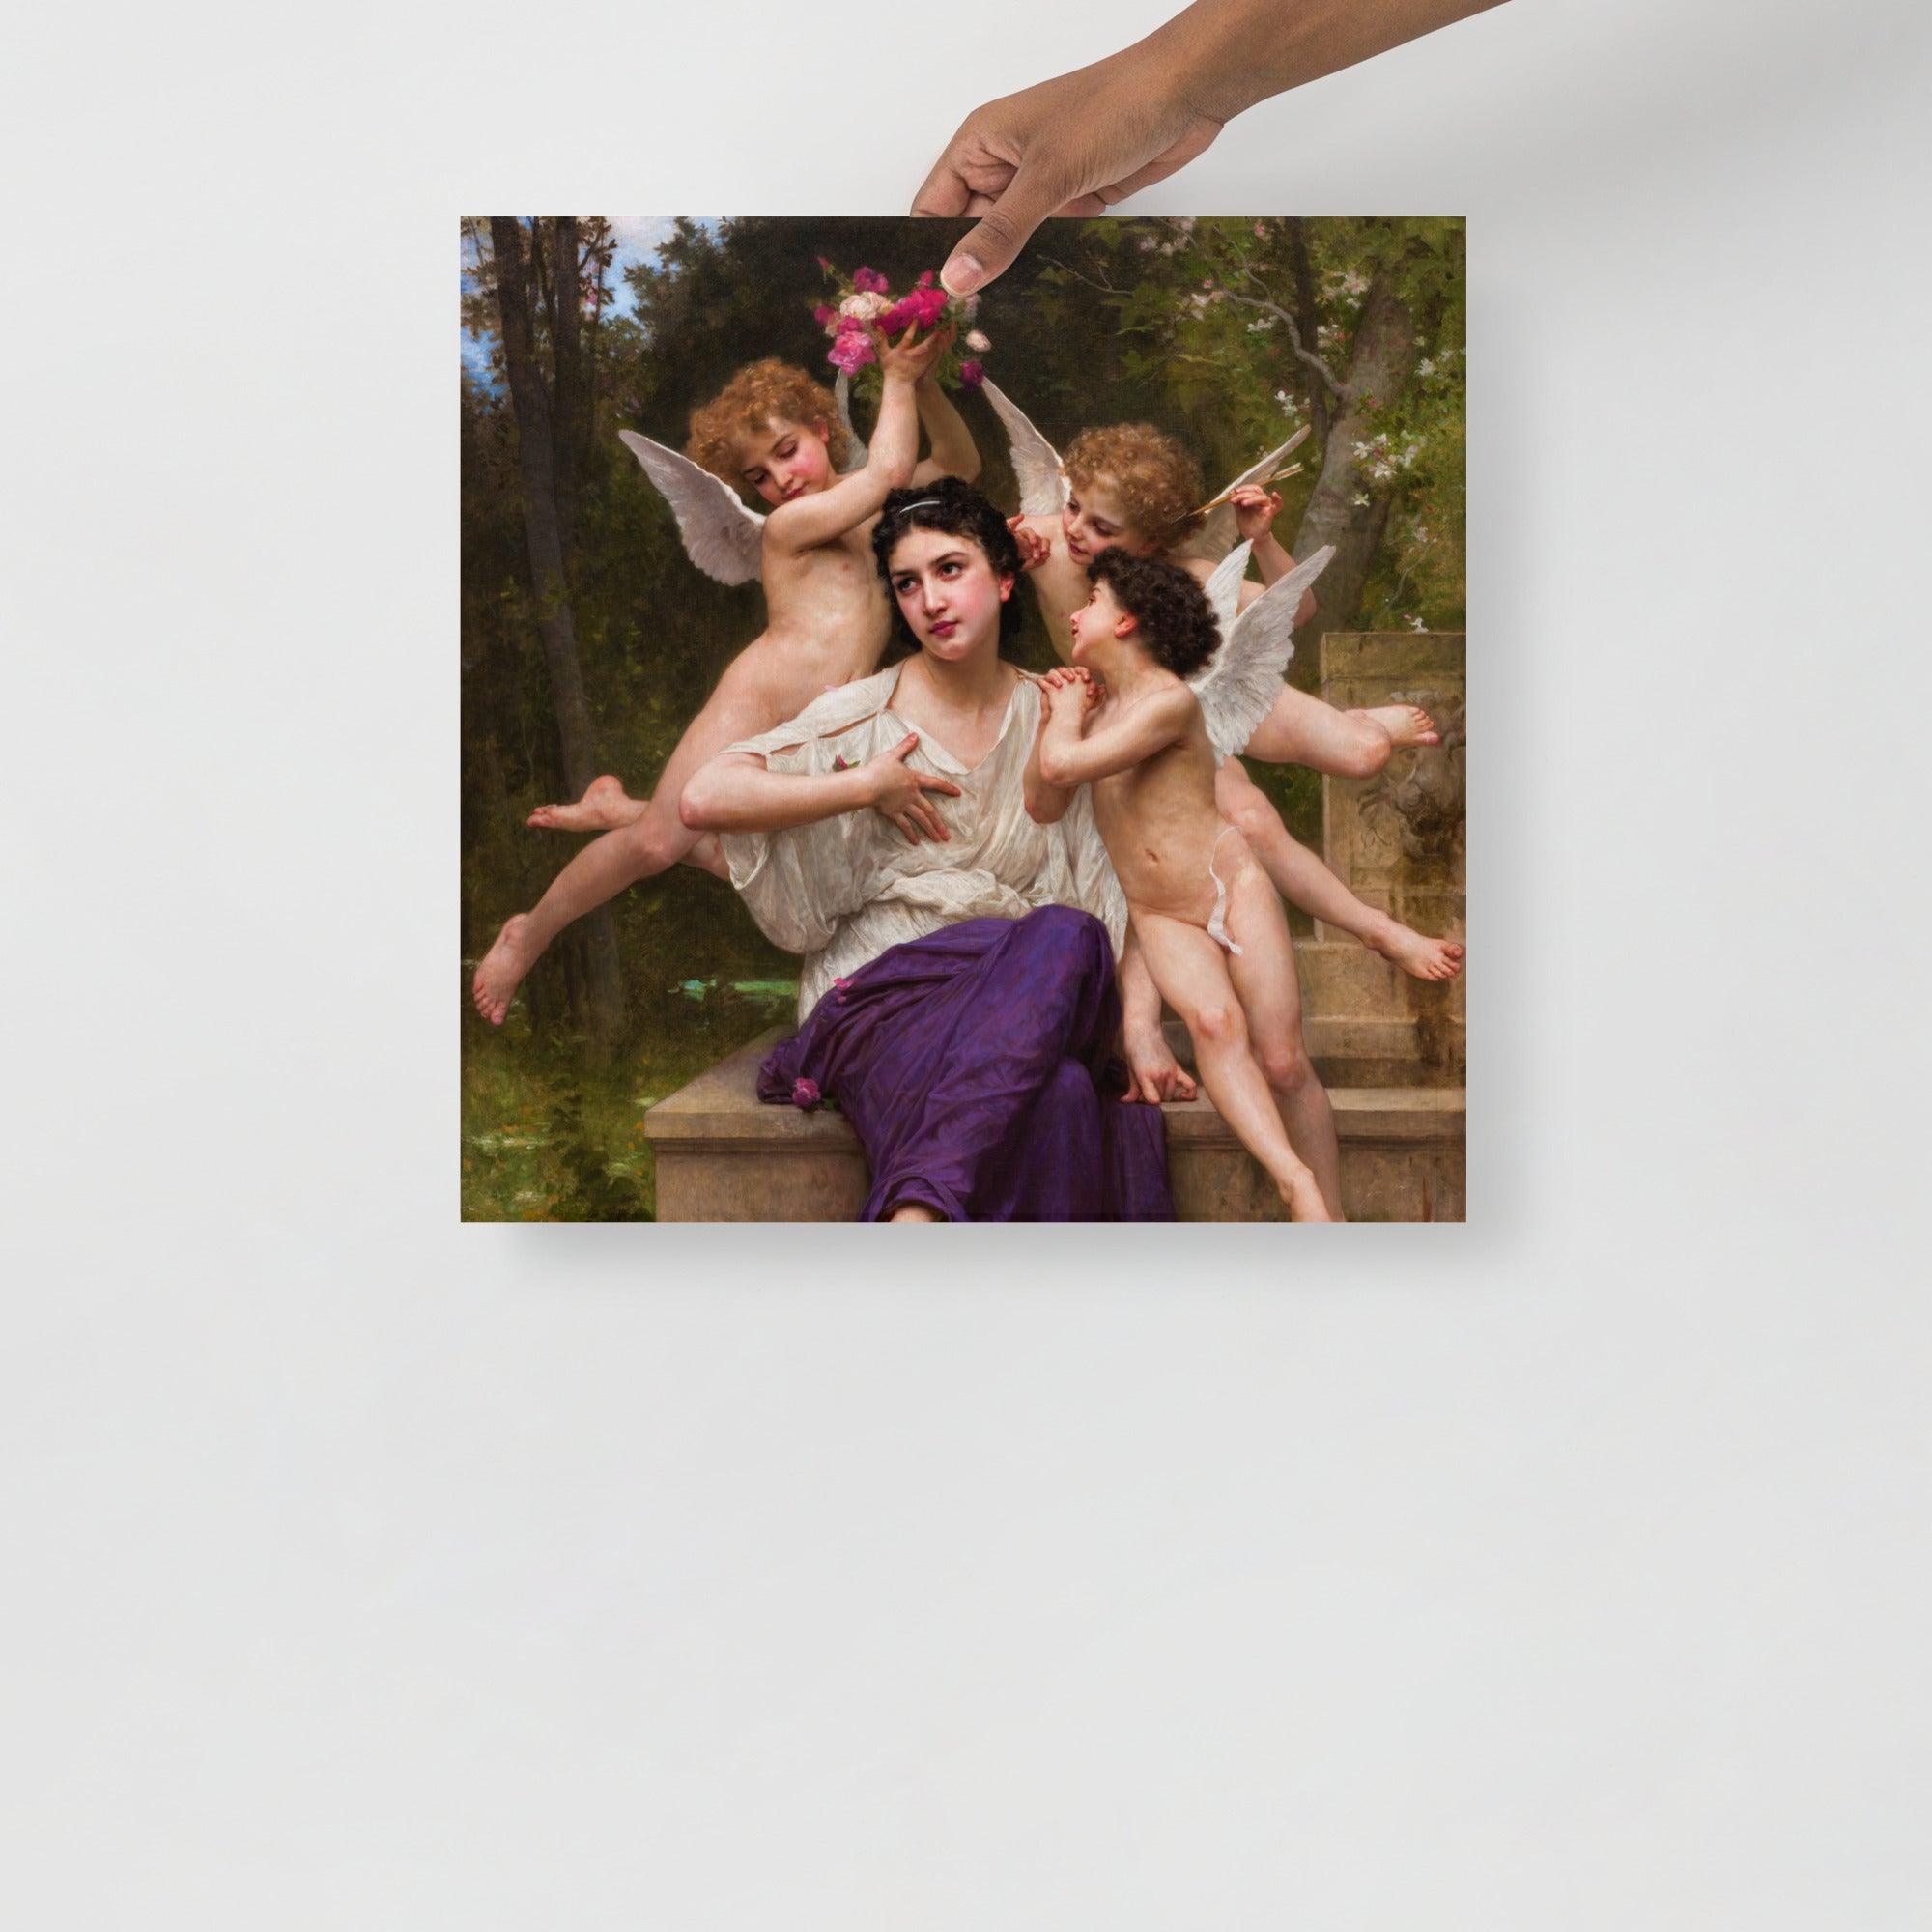 A Dream Of Spring by William Adolphe Bouguereau poster on a plain backdrop in size 18x18”.